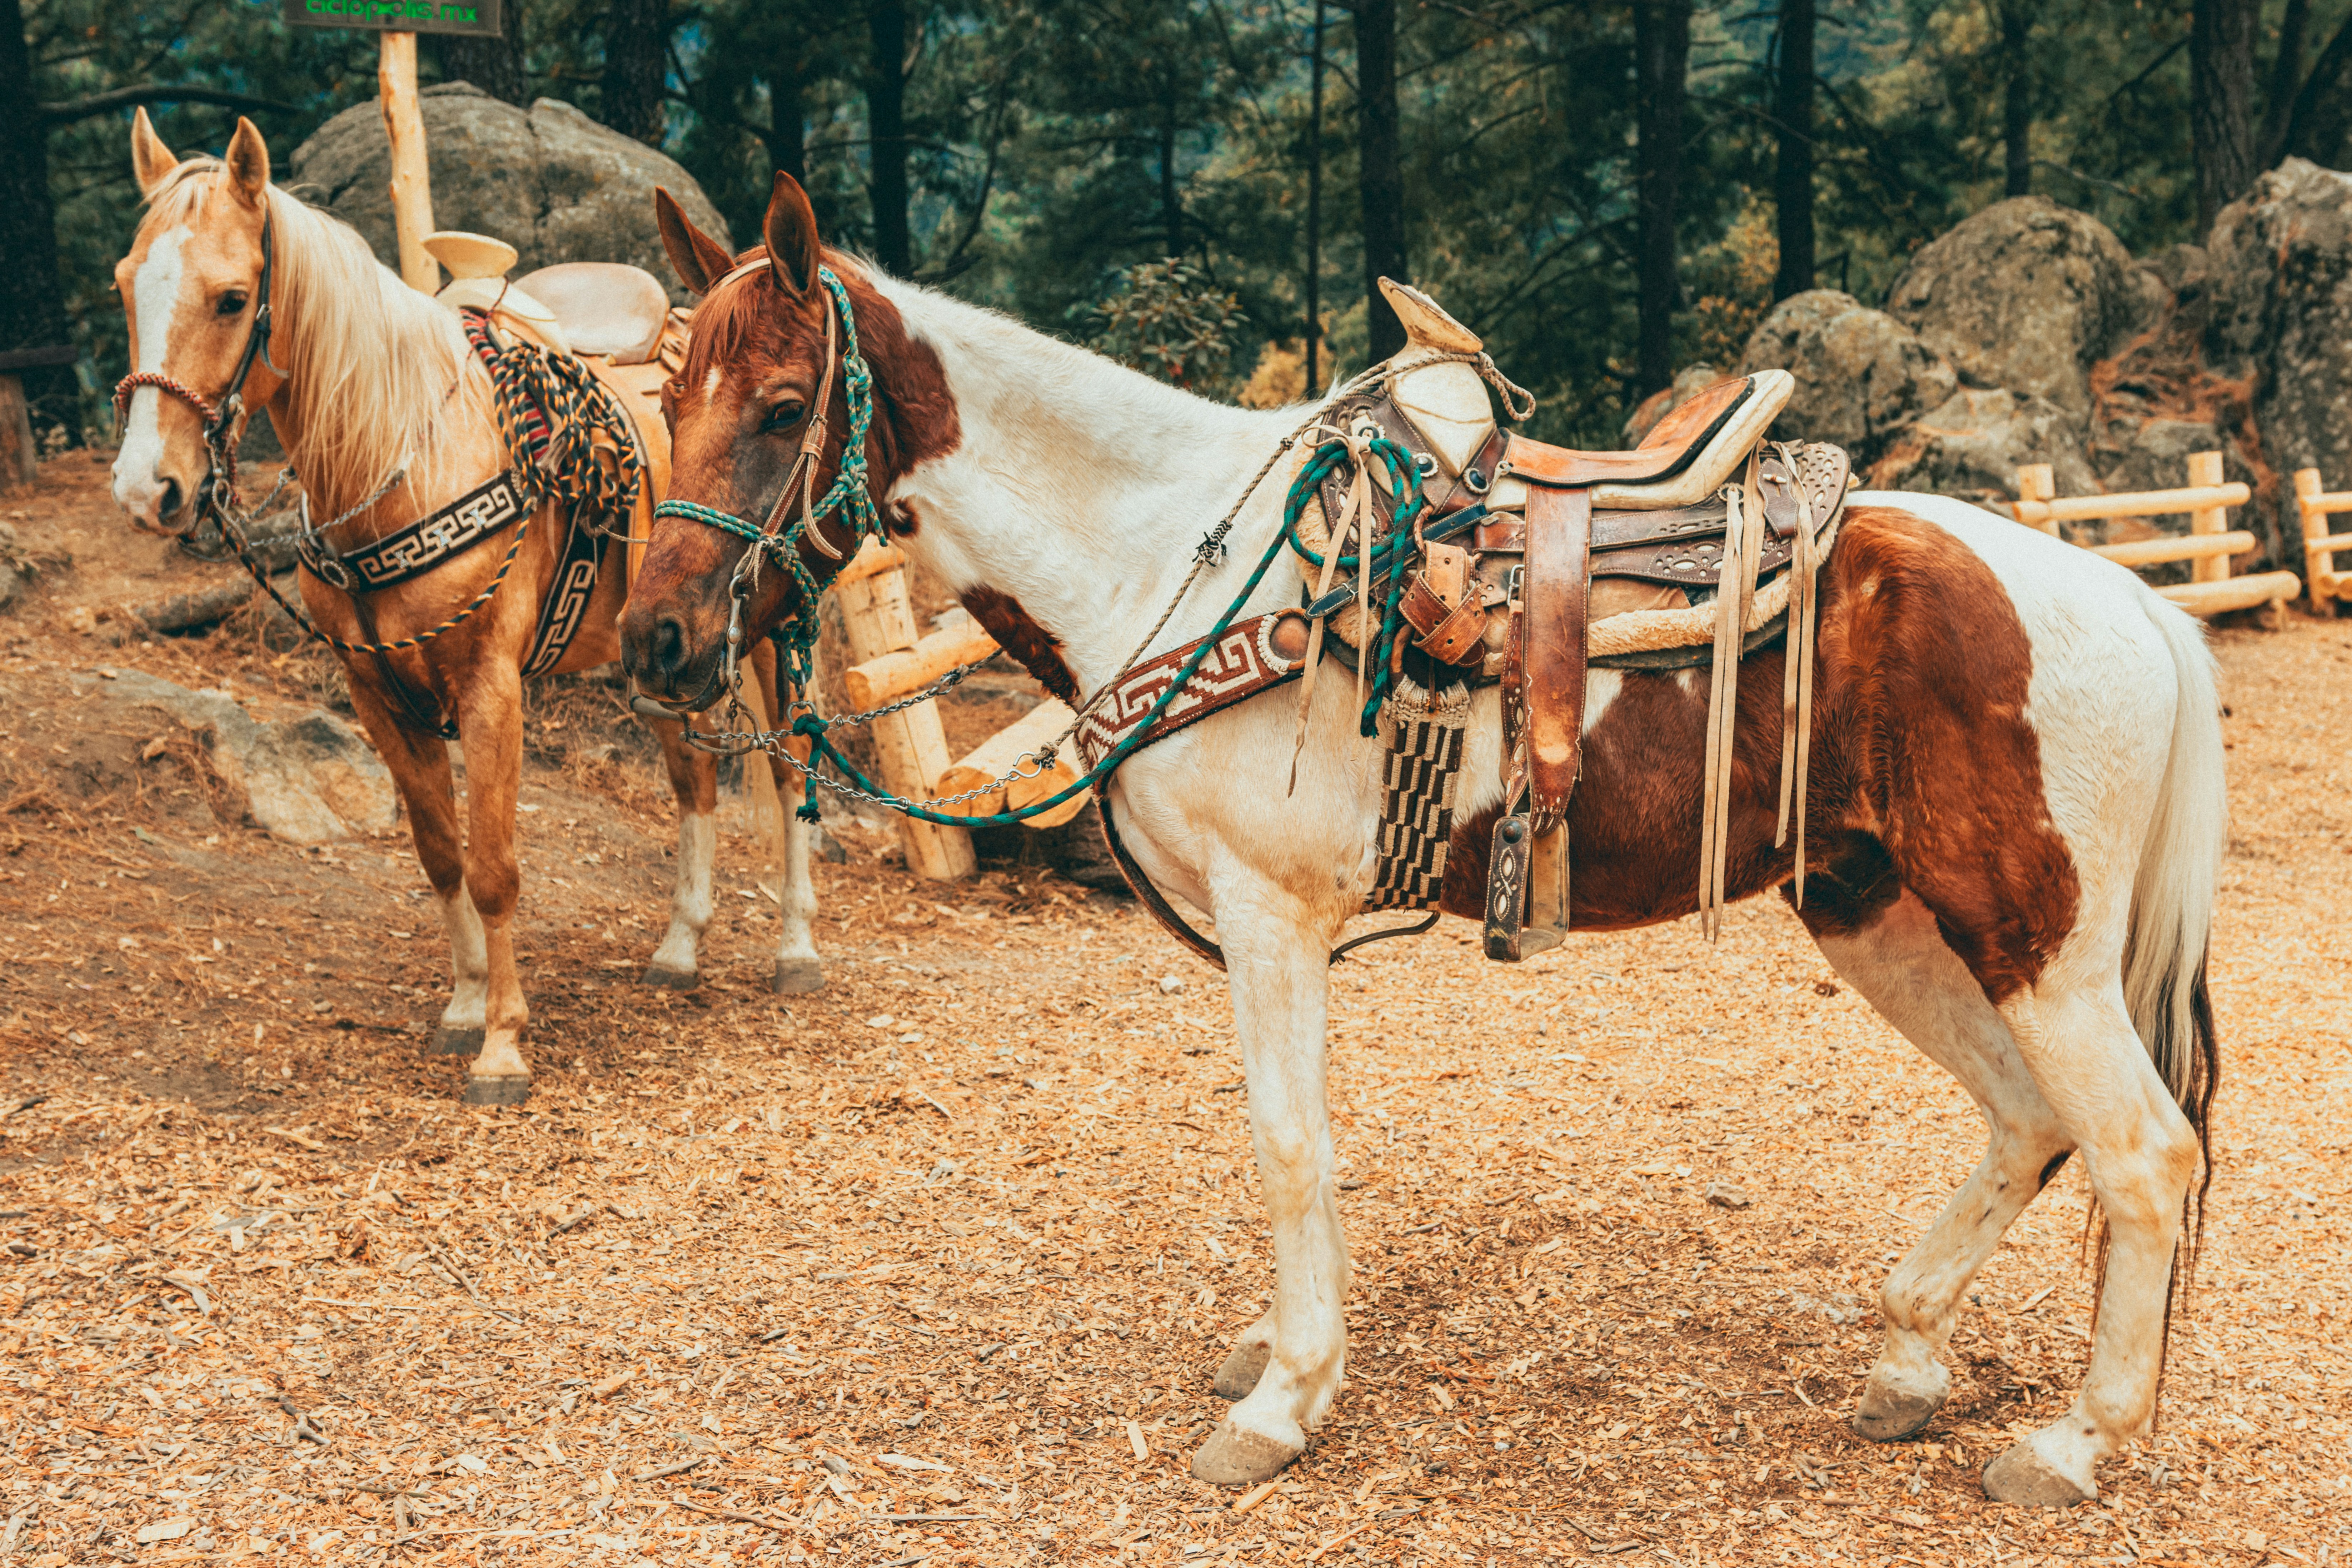 Few animals are prettier and more magnificient than the horse, and few have been captured in greater clarity and beauty by Unsplash photographers. Browse our curated selection of horse images and you're sure to find one that perfectly matches the aesthetic you're looking for.